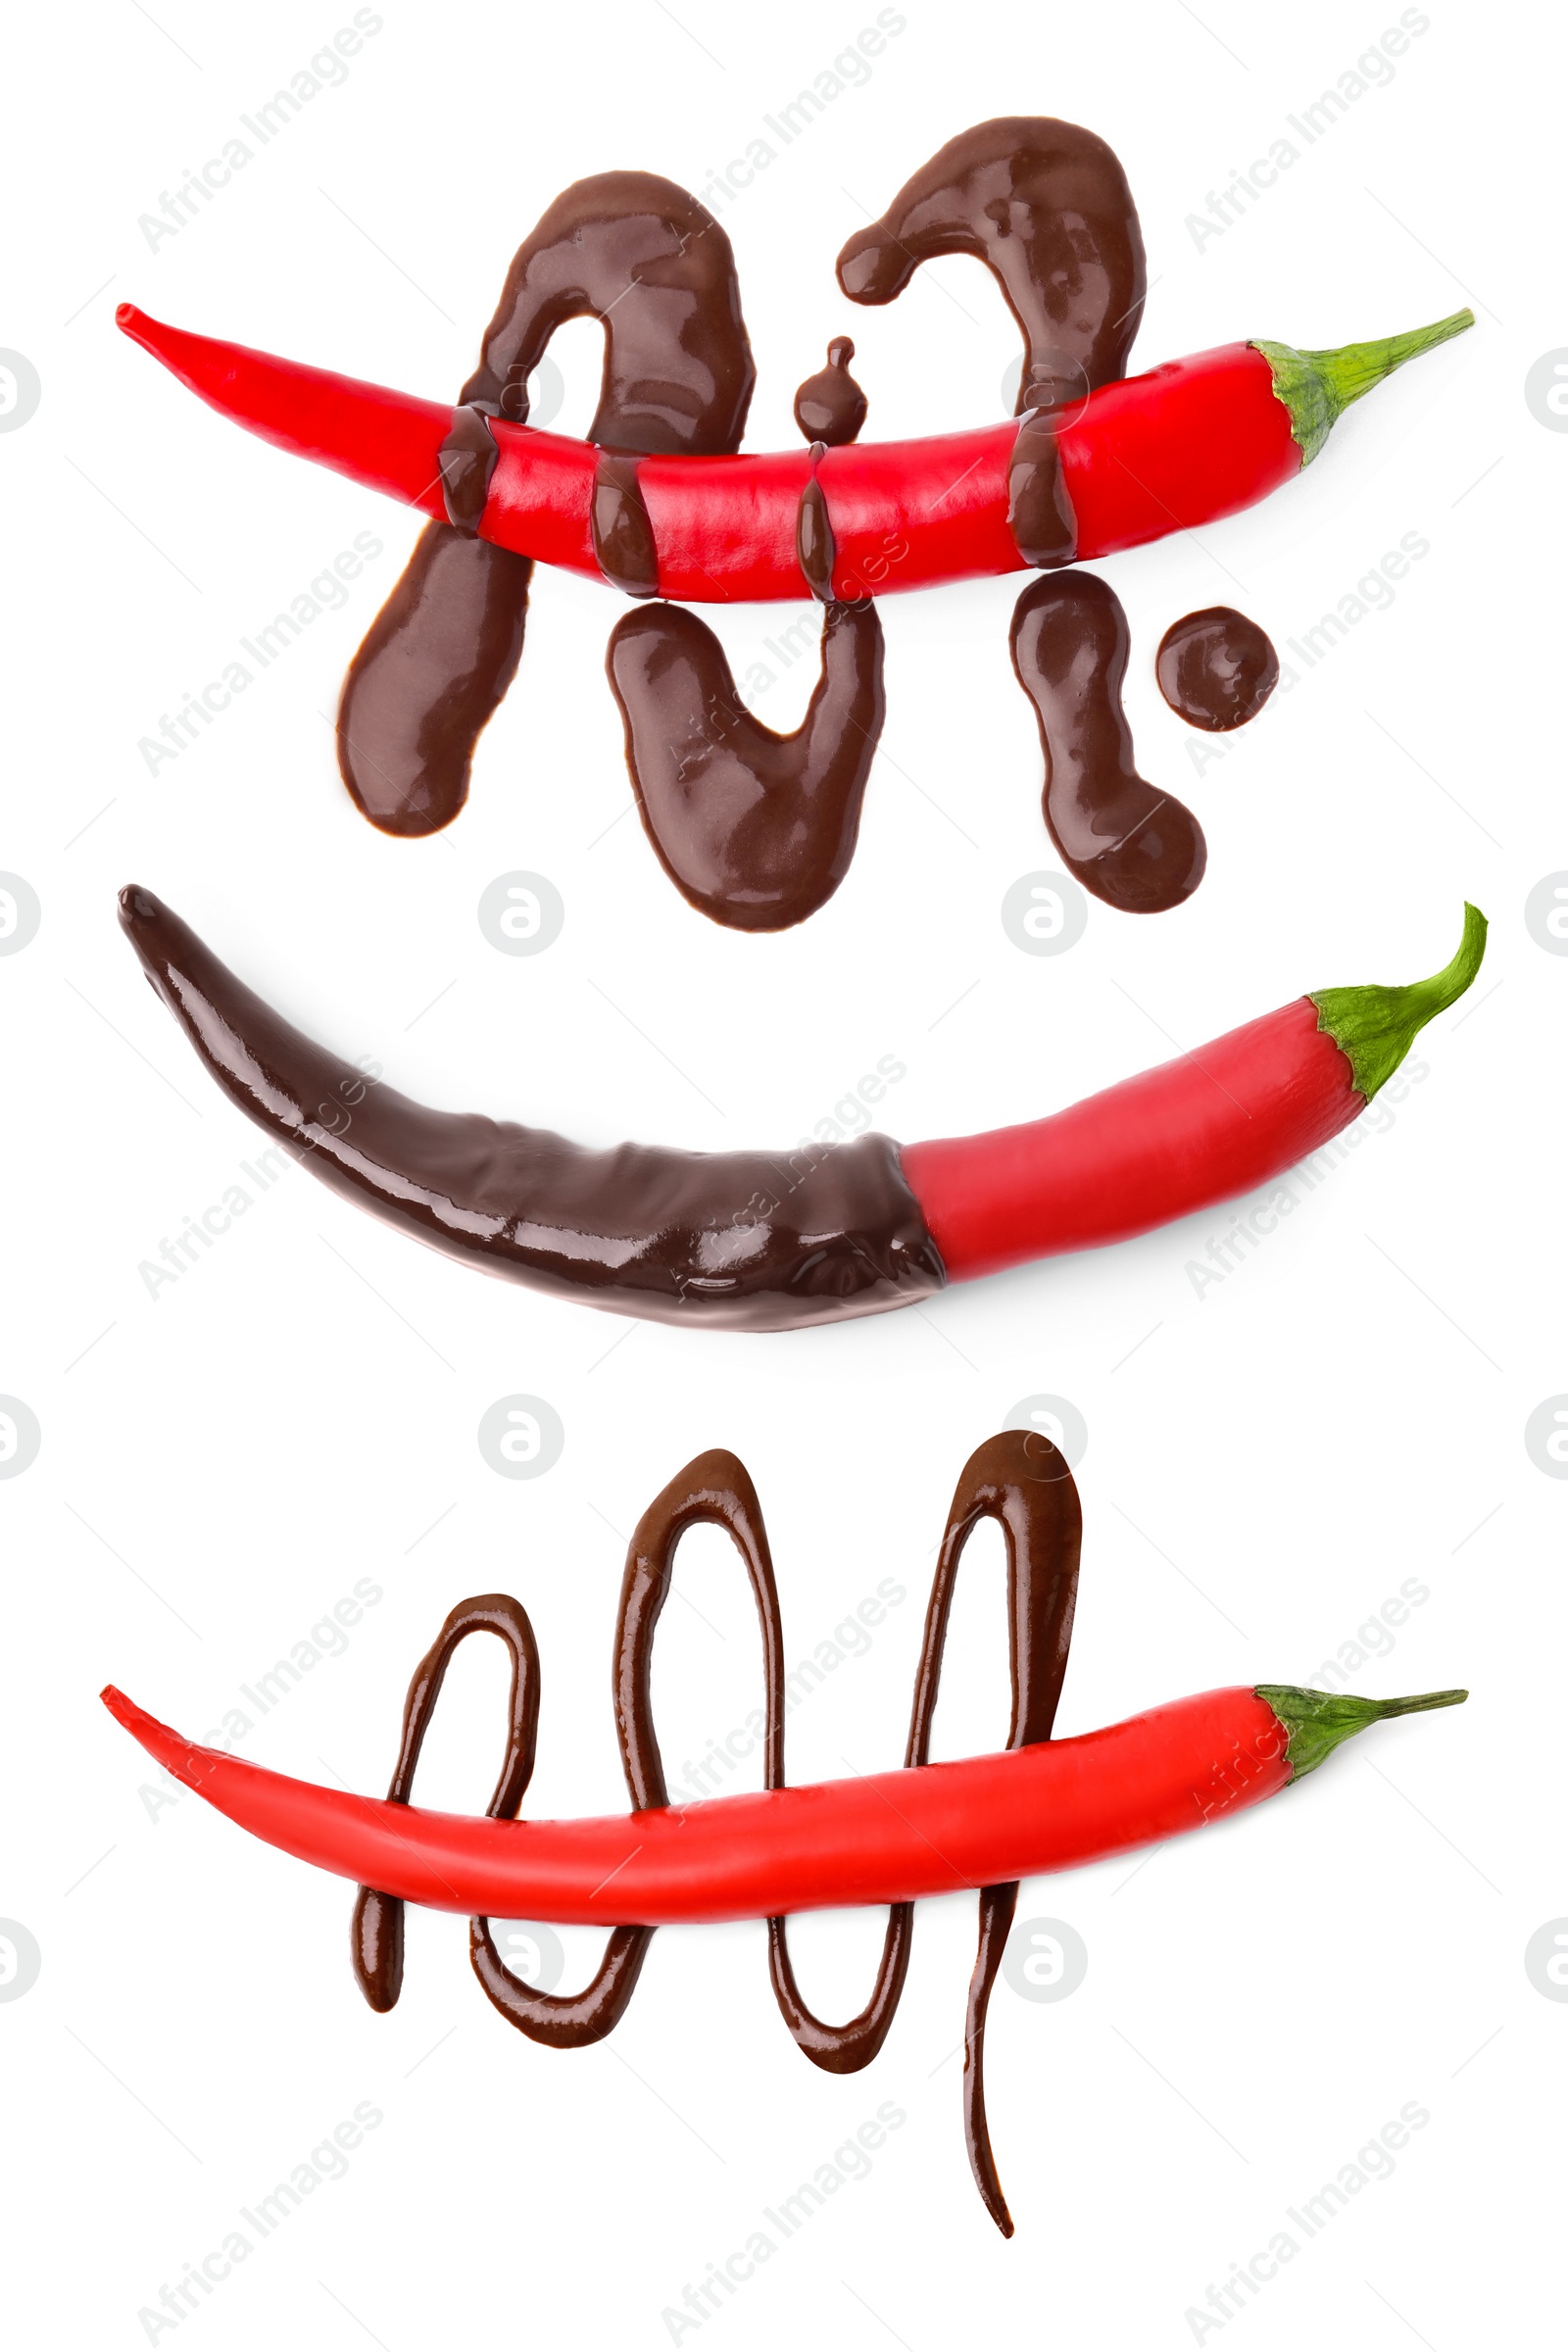 Image of Set of red chili peppers with melted chocolate on white background, top view